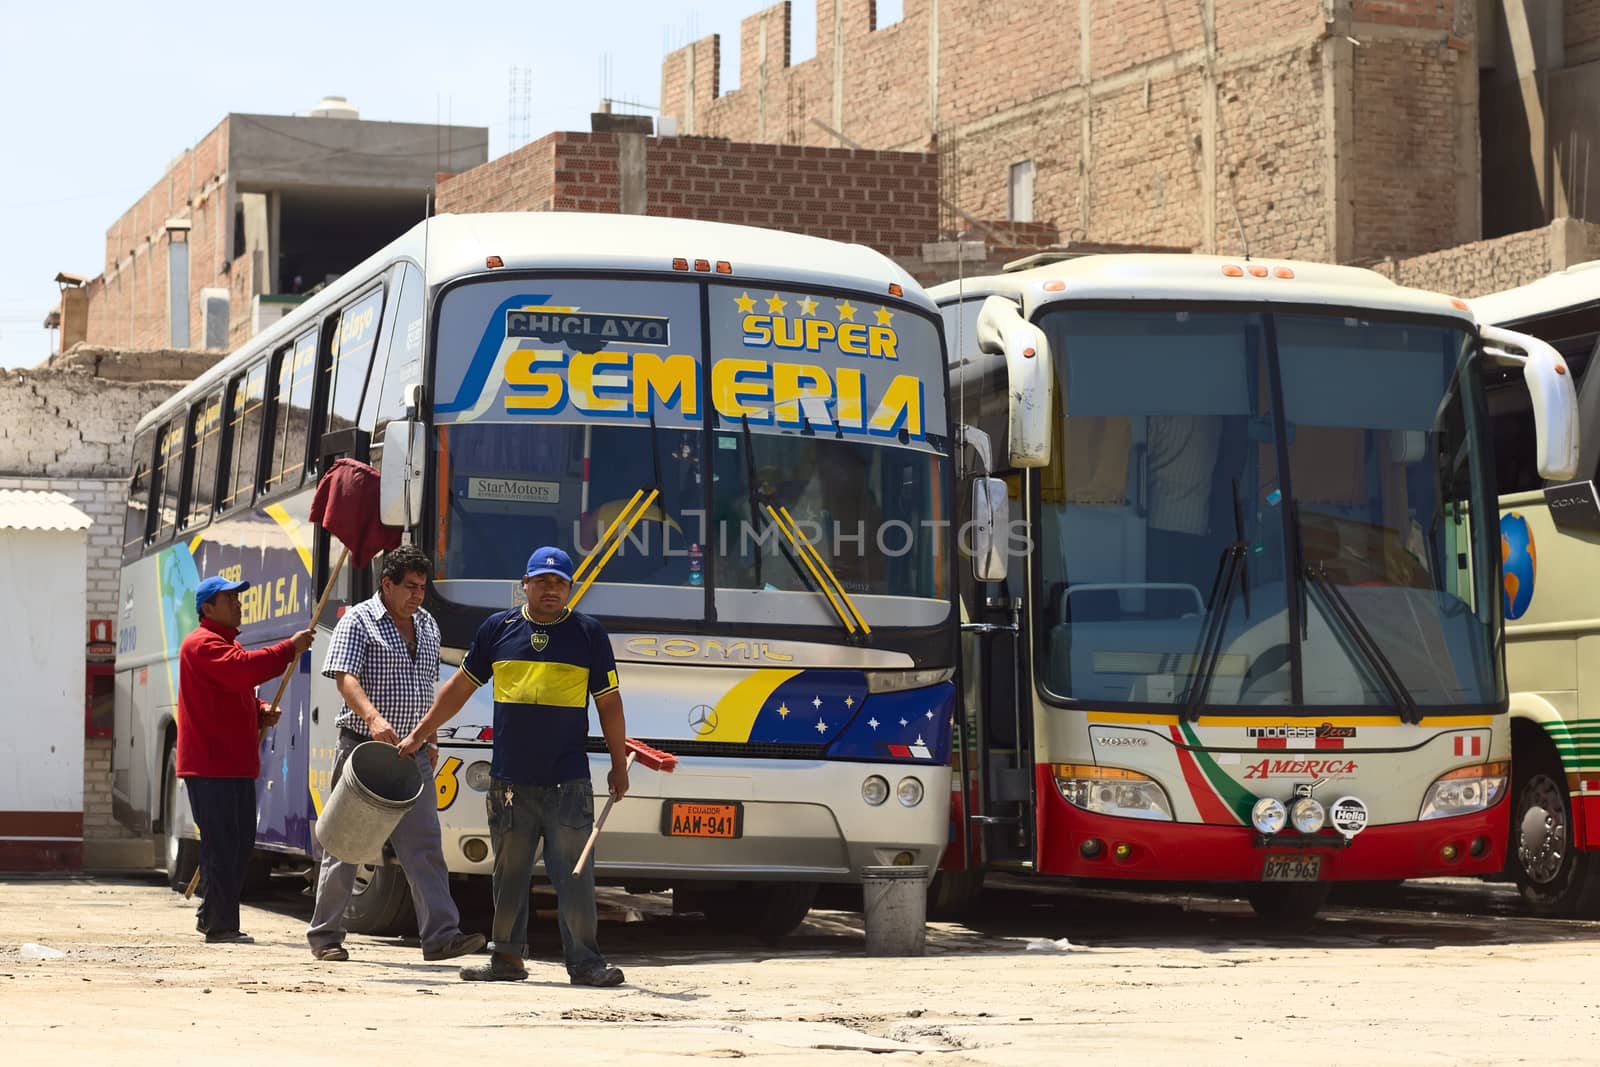 CHICLAYO, PERU - AUGUST 16, 2013: Unidentified people cleaning  a long-distance bus at a bus terminal on August 16, 2013 in Chiclayo, Peru. Big part of passenger transport takes place in buses in South America, trains are very seldom and flights are relatively expensive in comparison to buses. 